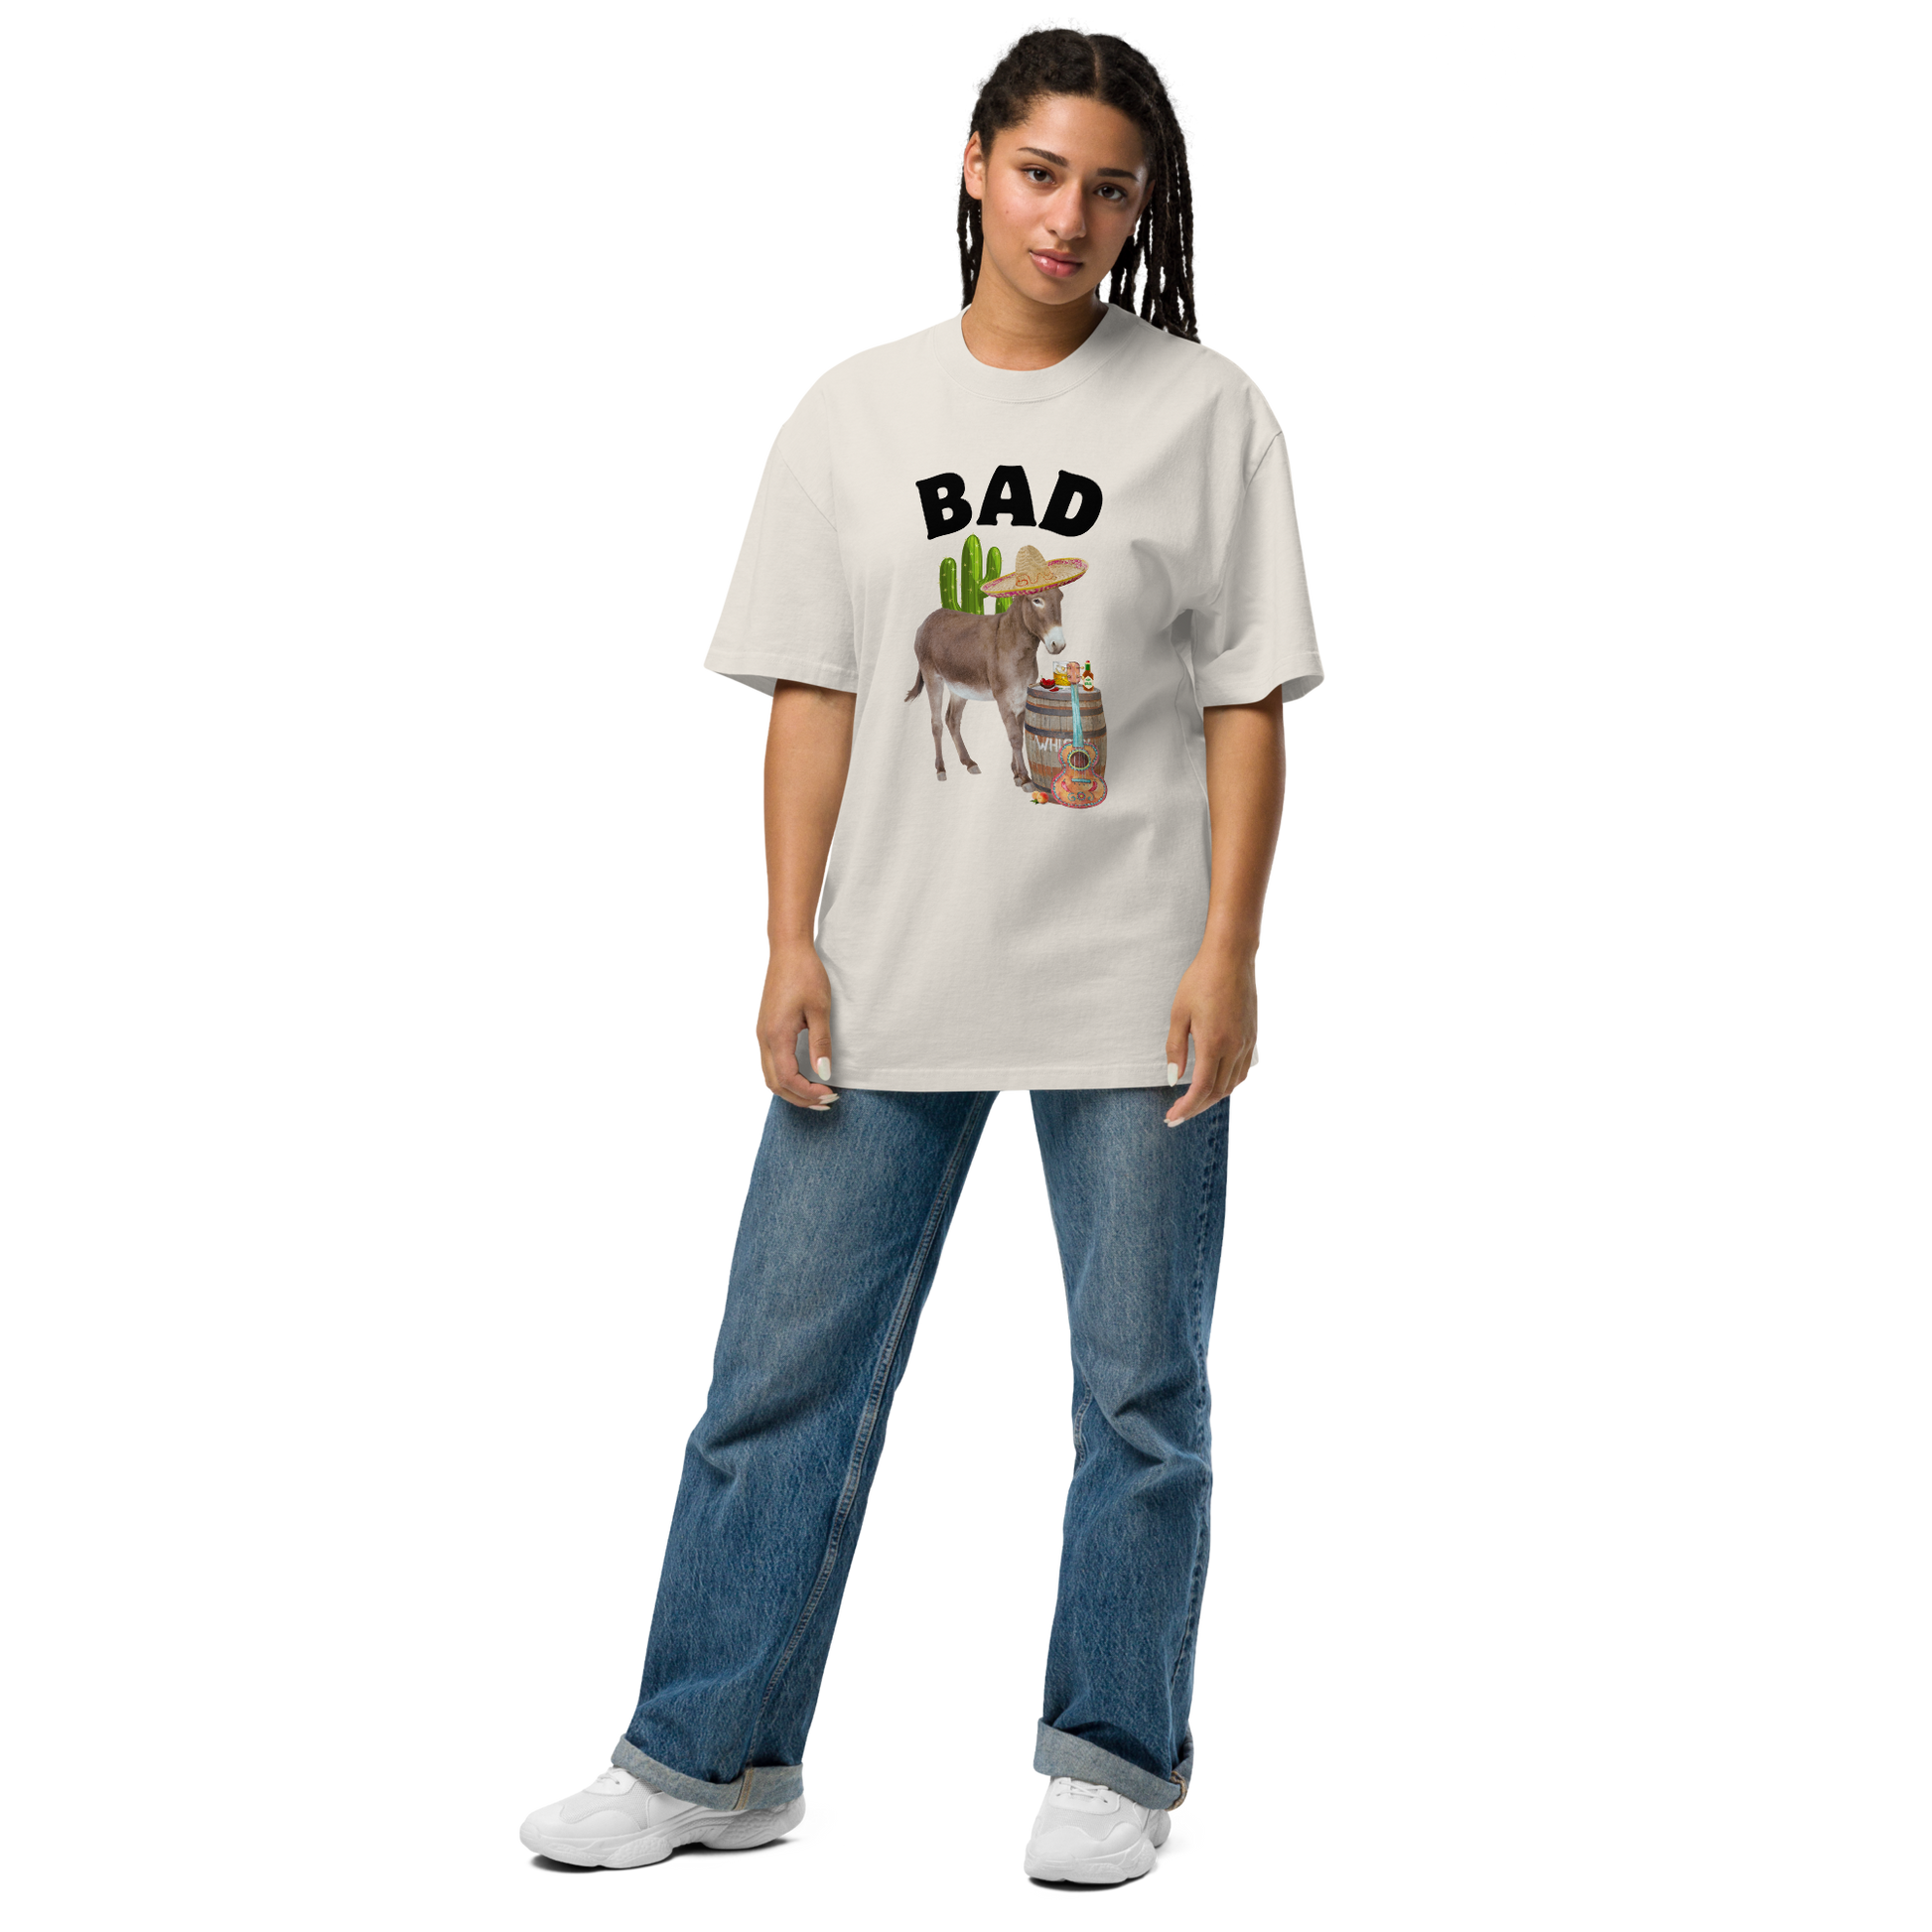 Woman wearing a Faded Bone Donkey Oversized T-Shirt Featuring a cheeky Bad Ass Donkey graphic on the chest - Funny Graphic Bad Ass Donkey Oversized Tees - Boozy Fox